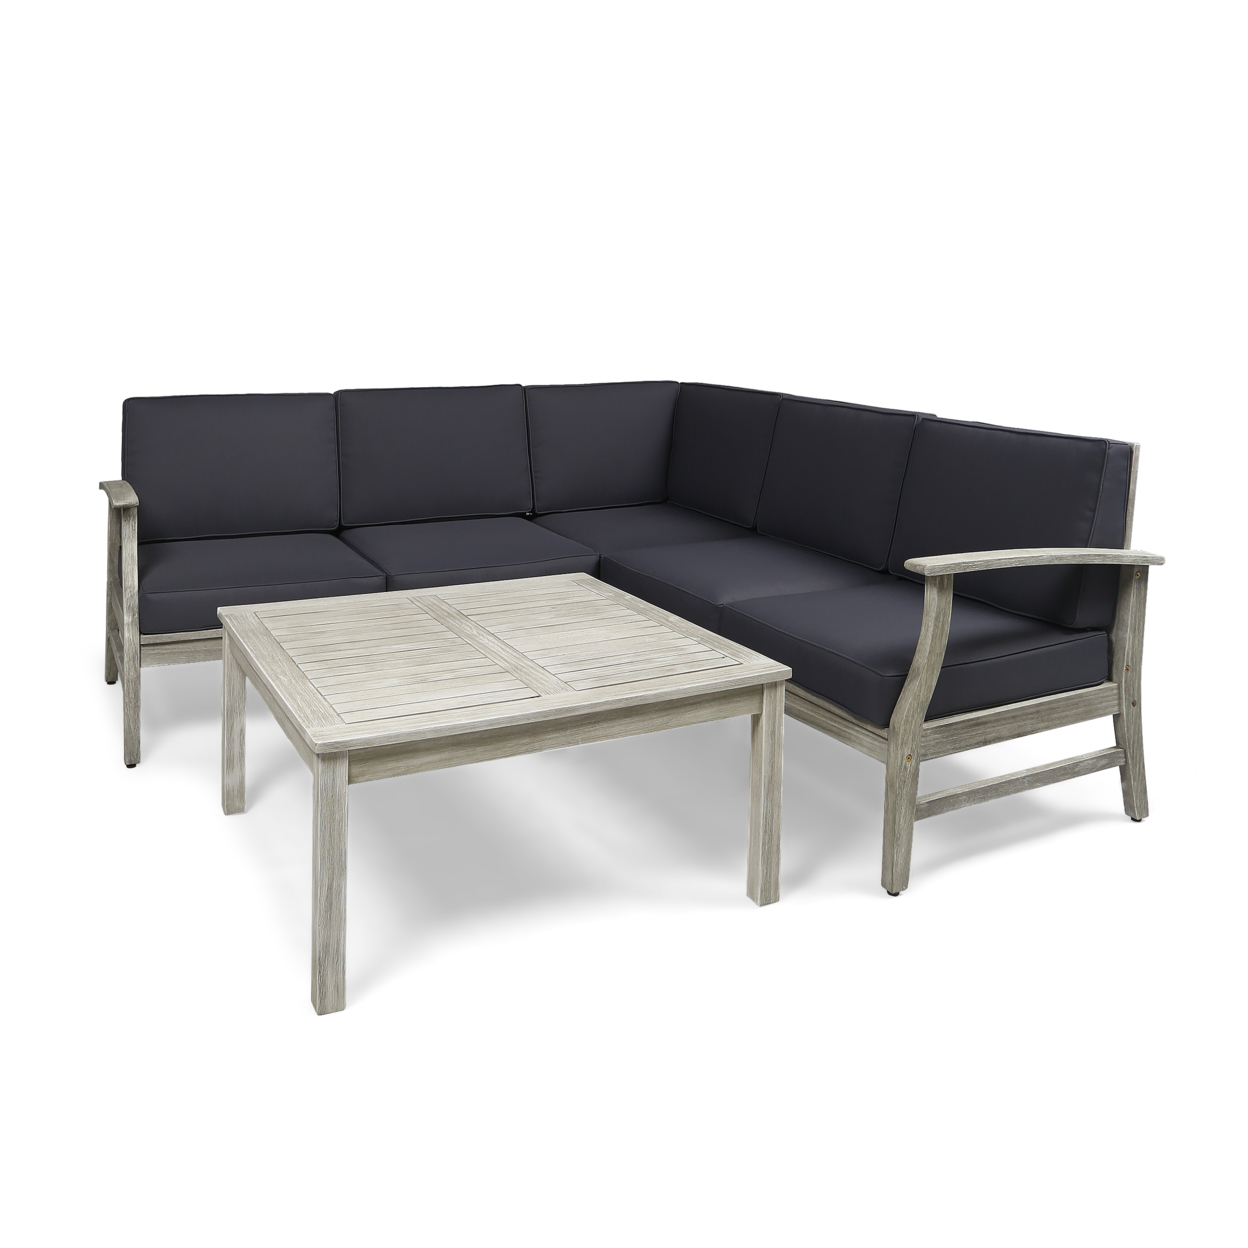 Mia Outdoor 6 Piece Acacia Wood Sectional Sofa And Coffee Table Set